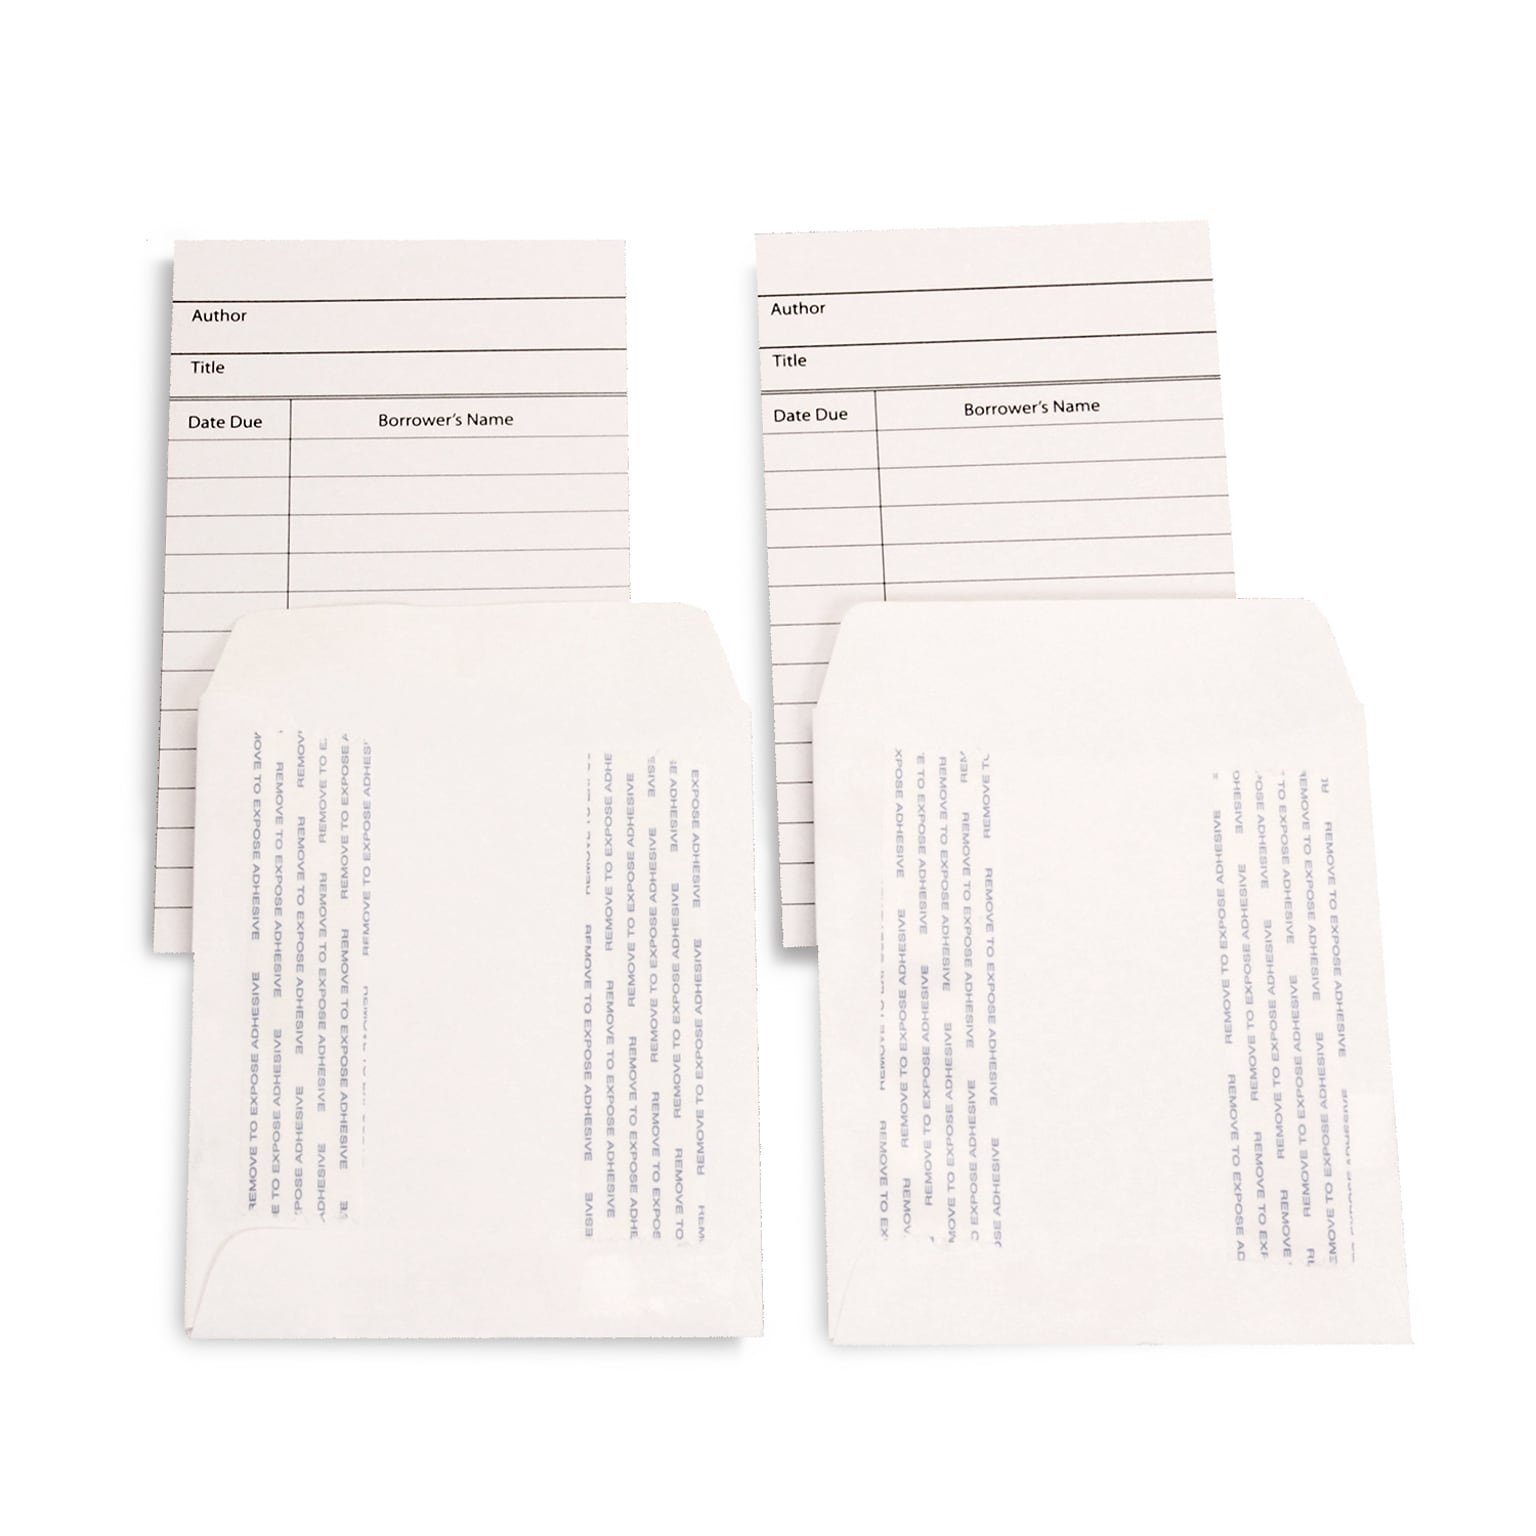 Hygloss Library Cards & Self-Adhesive Pockets Combo, White, 150 Each/300 Pieces Total (HYG61161)